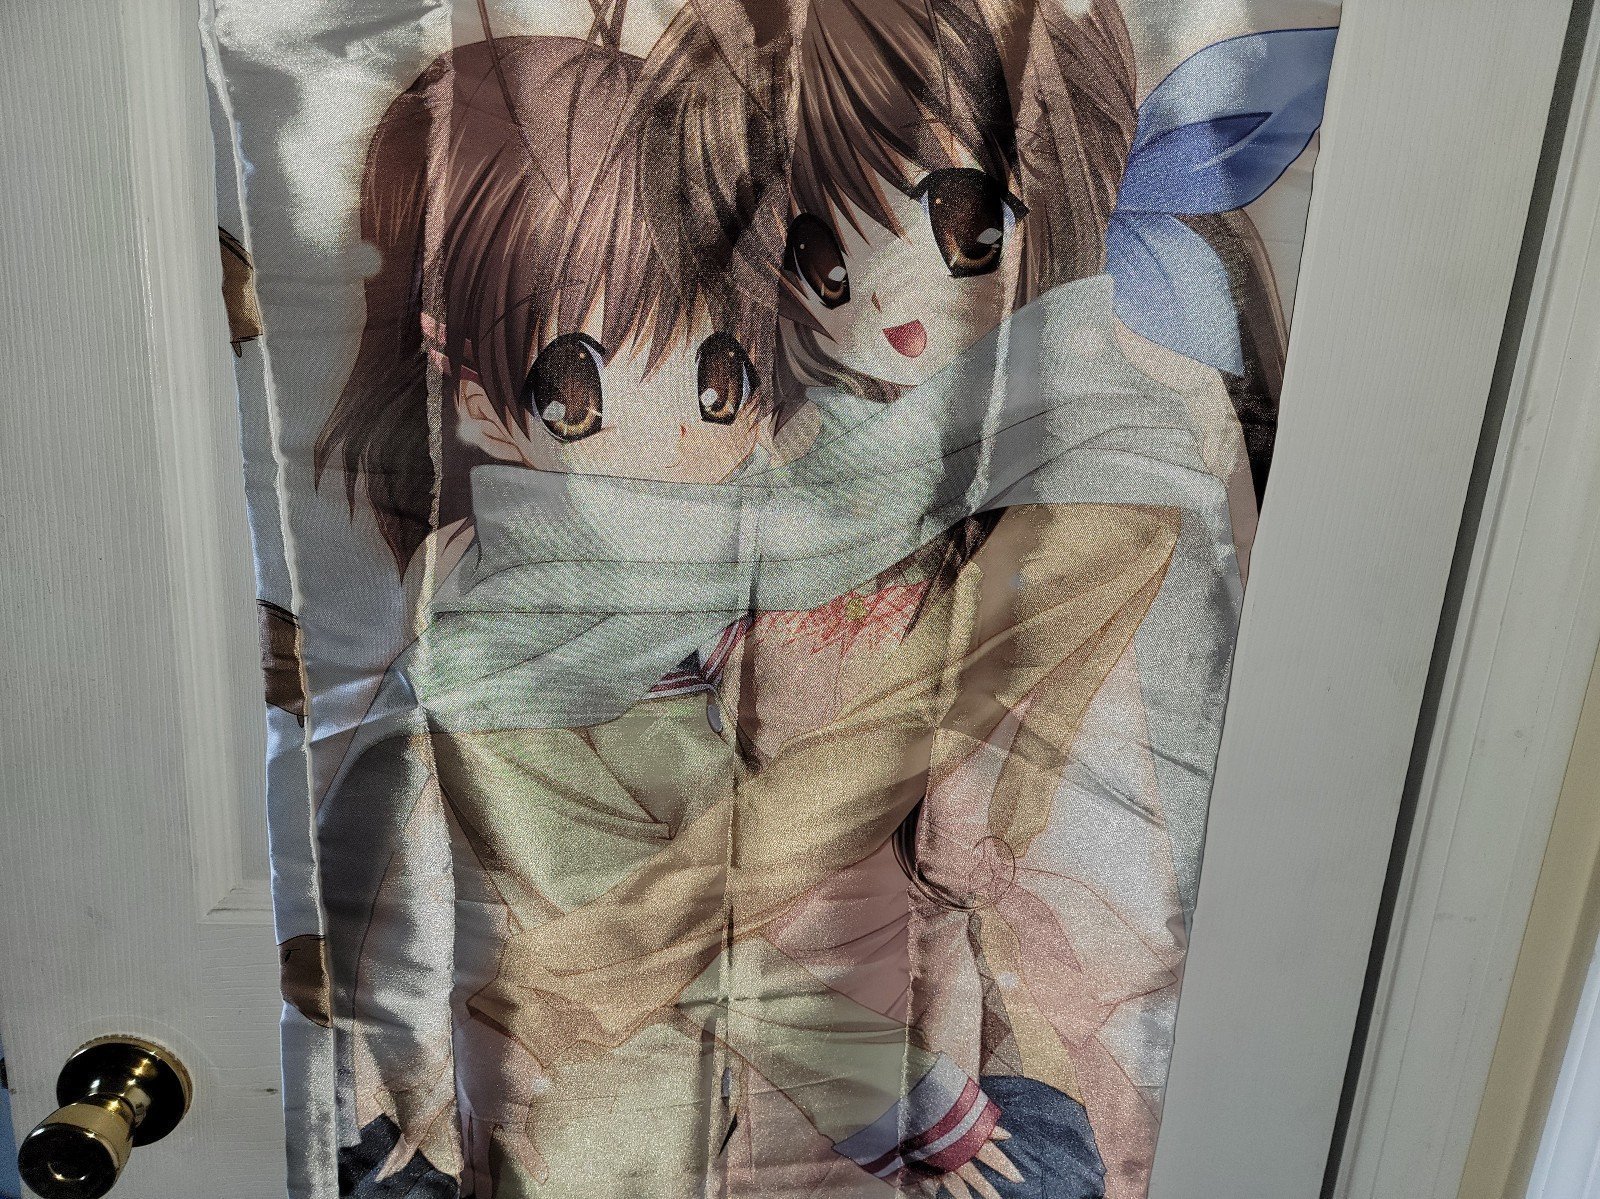 Clannad rare body pillow case FbE5auD28